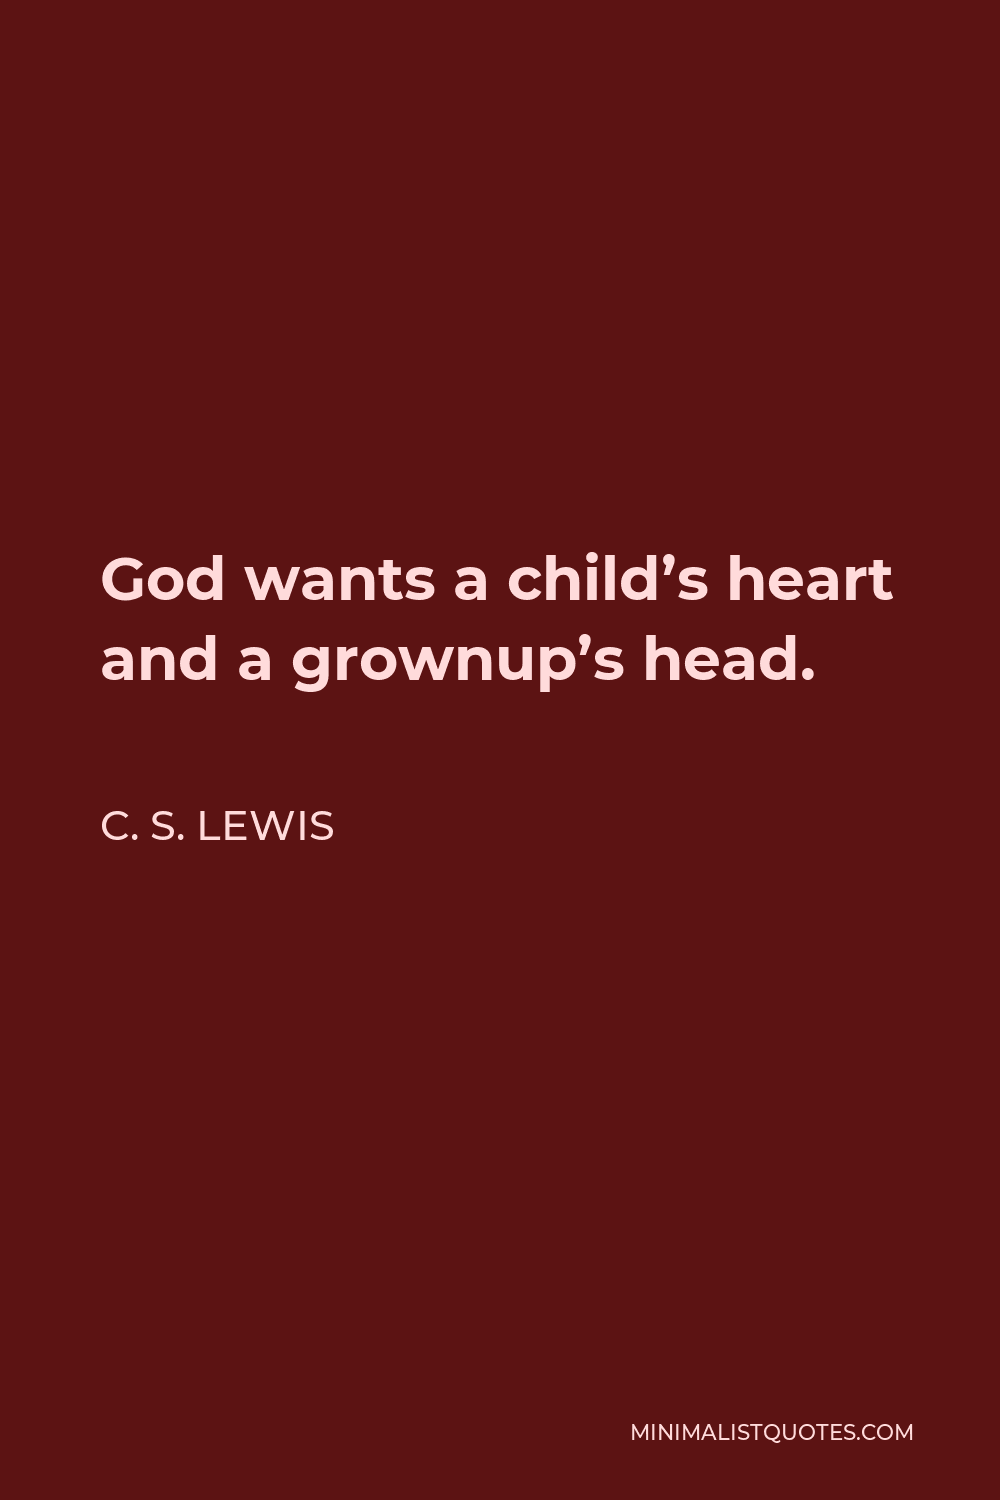 C. S. Lewis Quote - God wants a child’s heart and a grownup’s head.